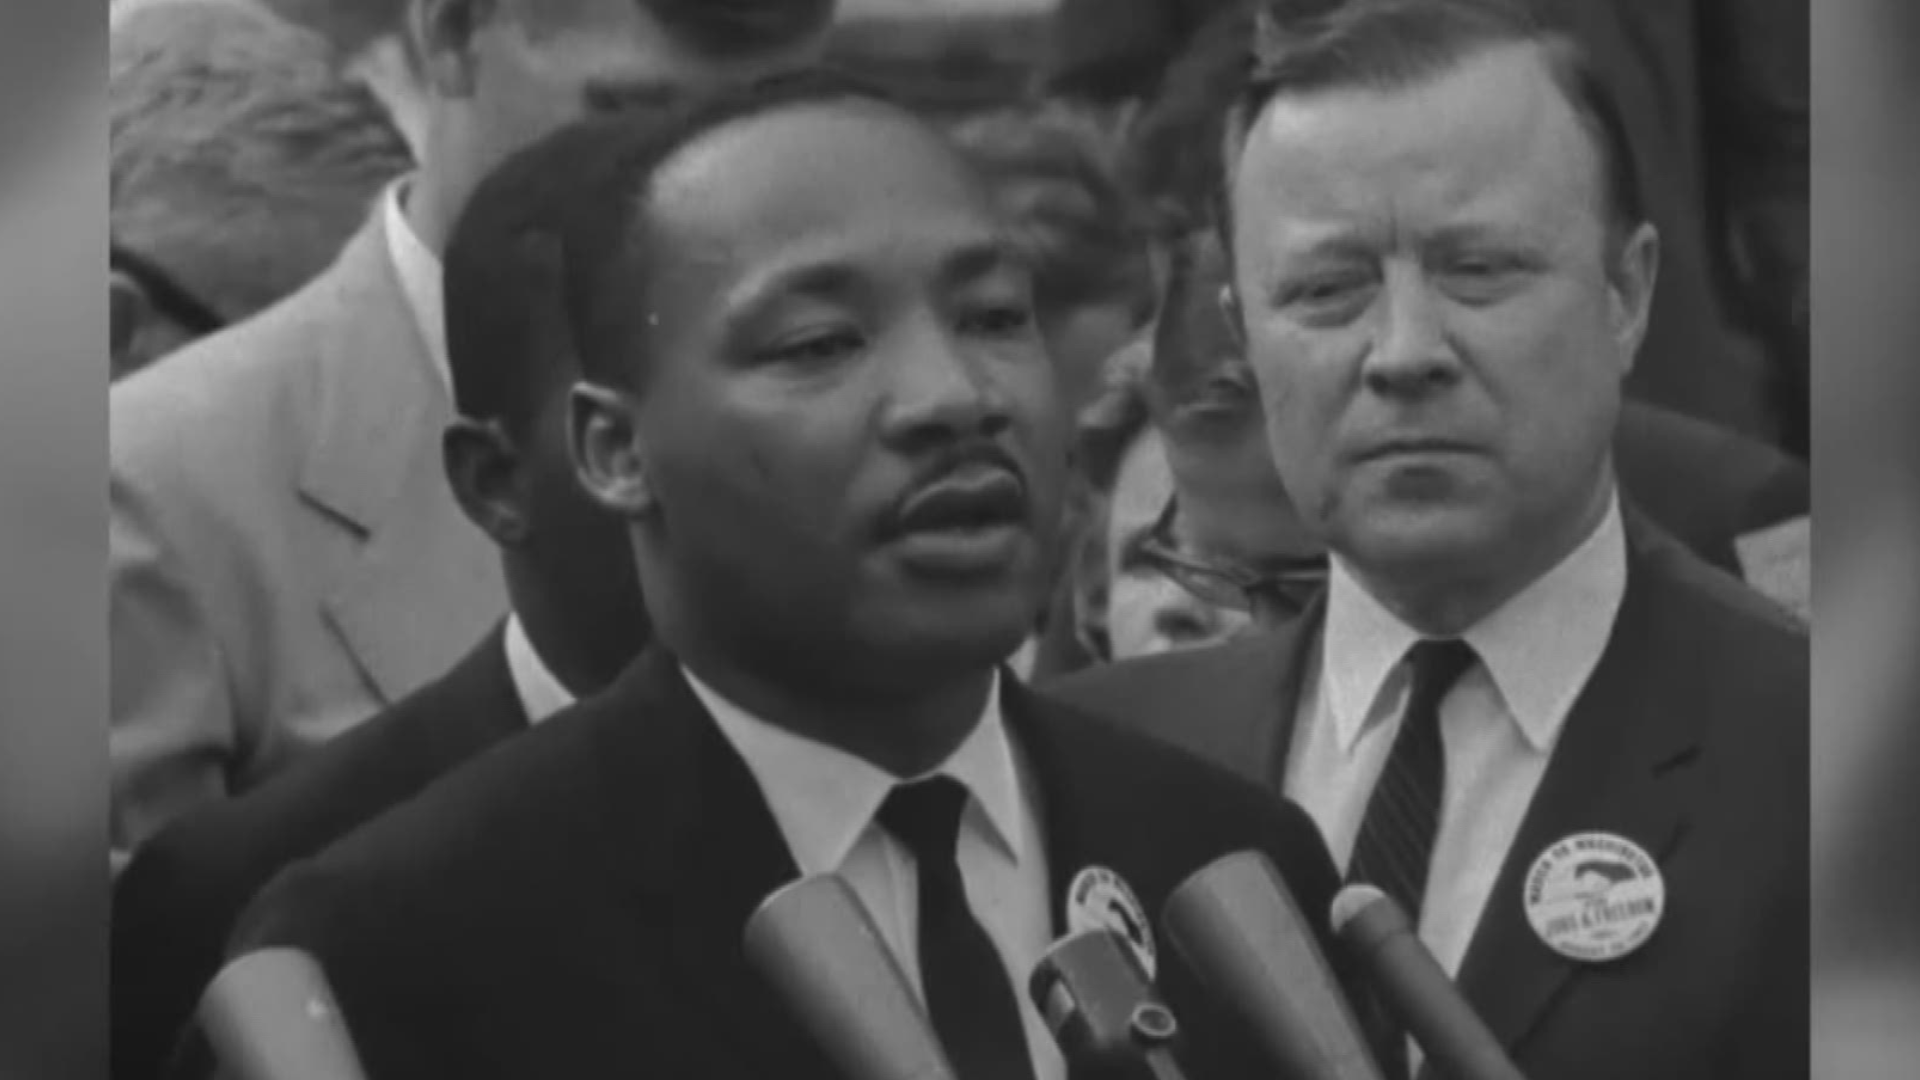 Dr. King's famous dream encompassed much more than just racial justice.